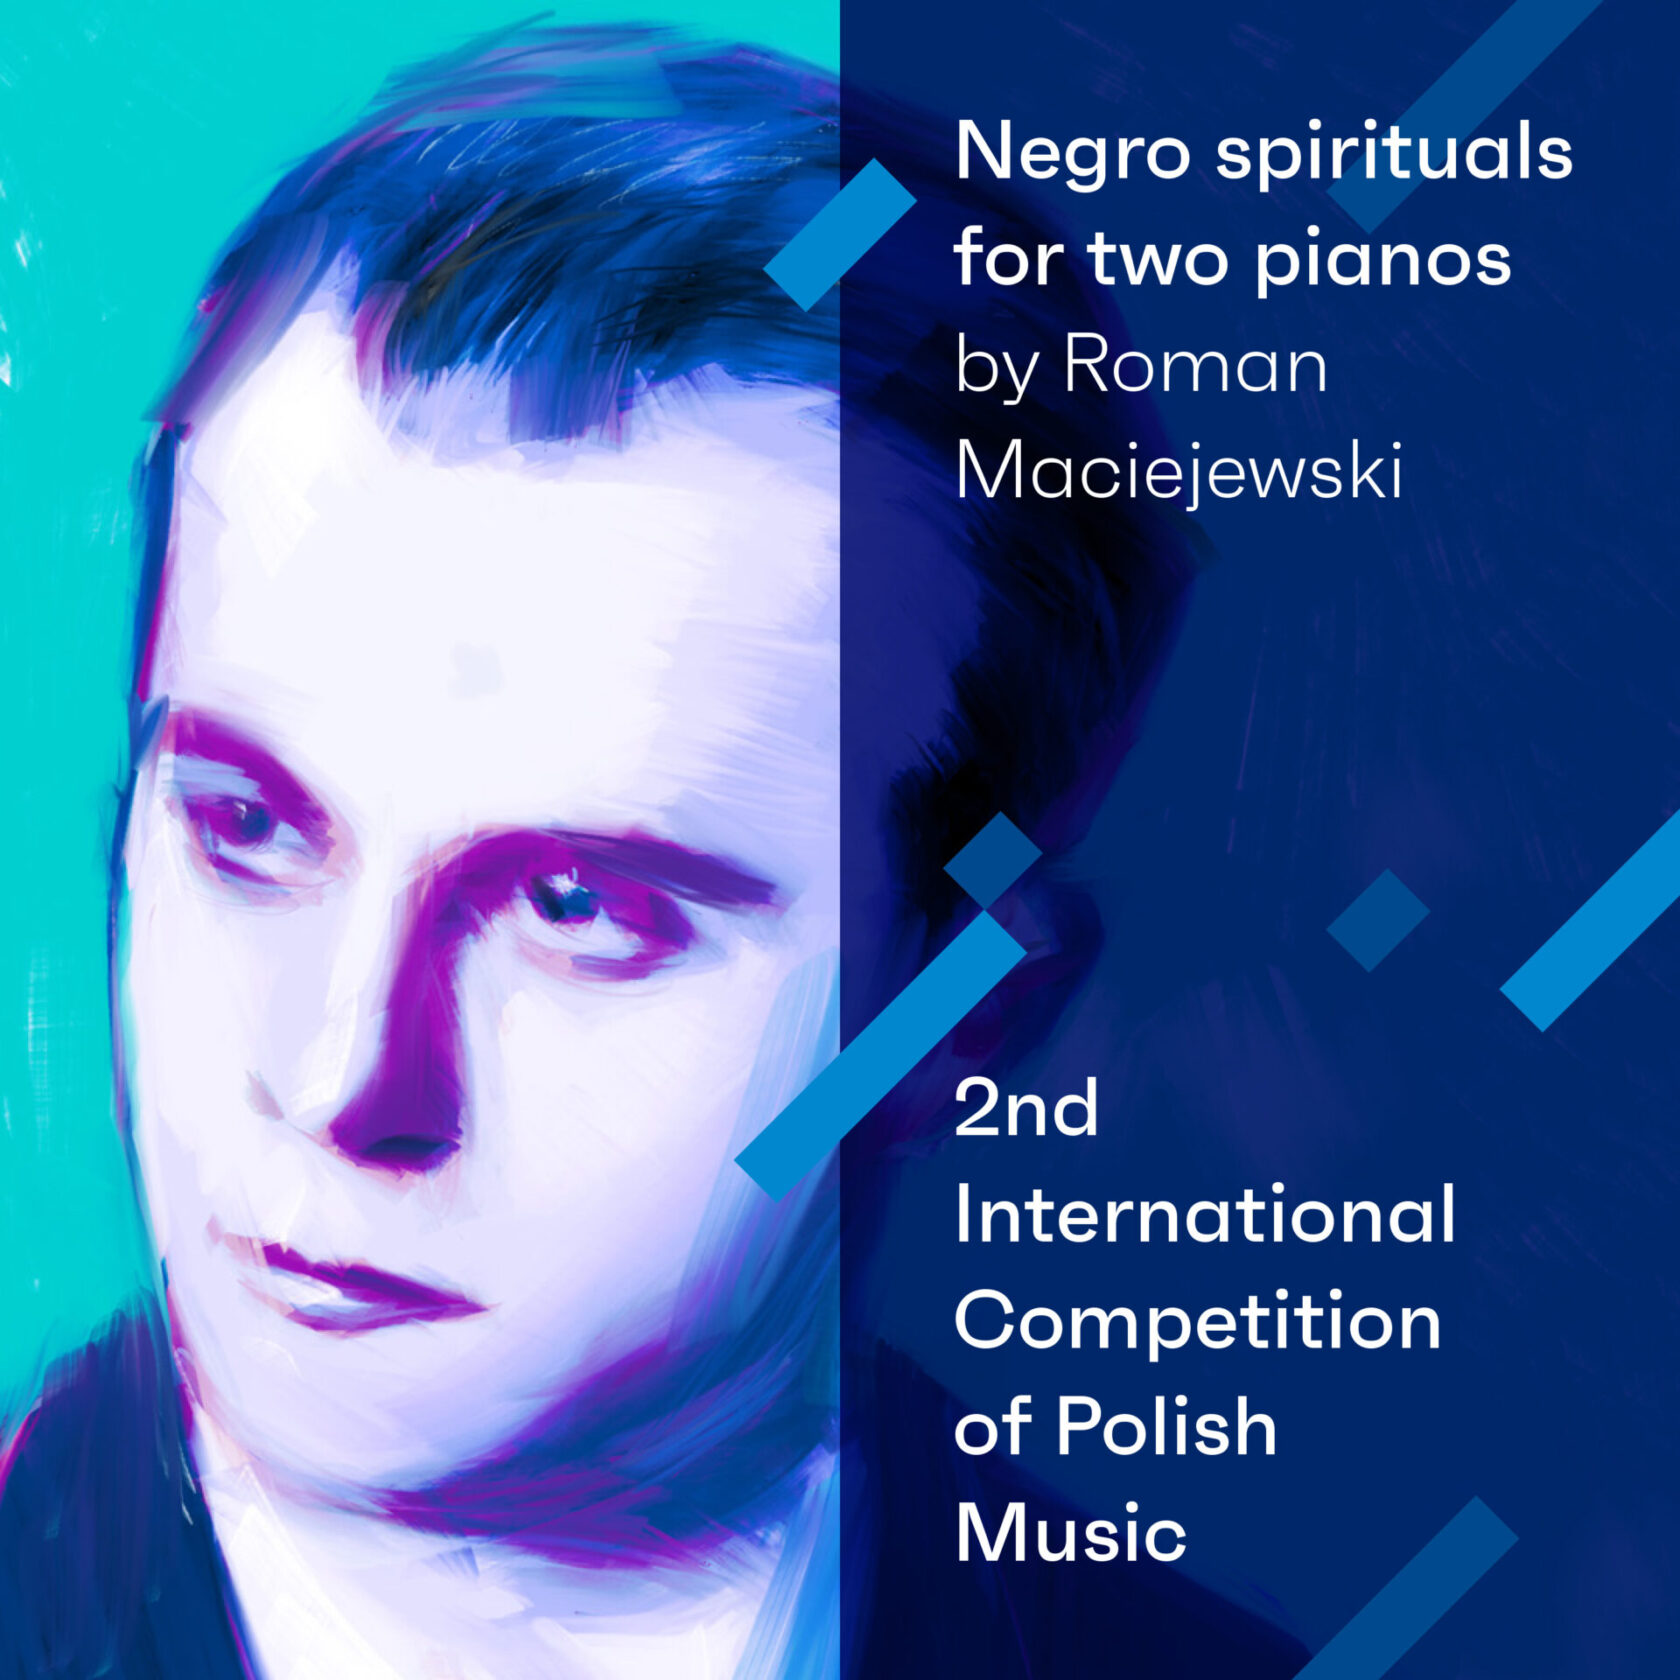 https://id.ffm.to/negro_spirituals_for_two_pianos